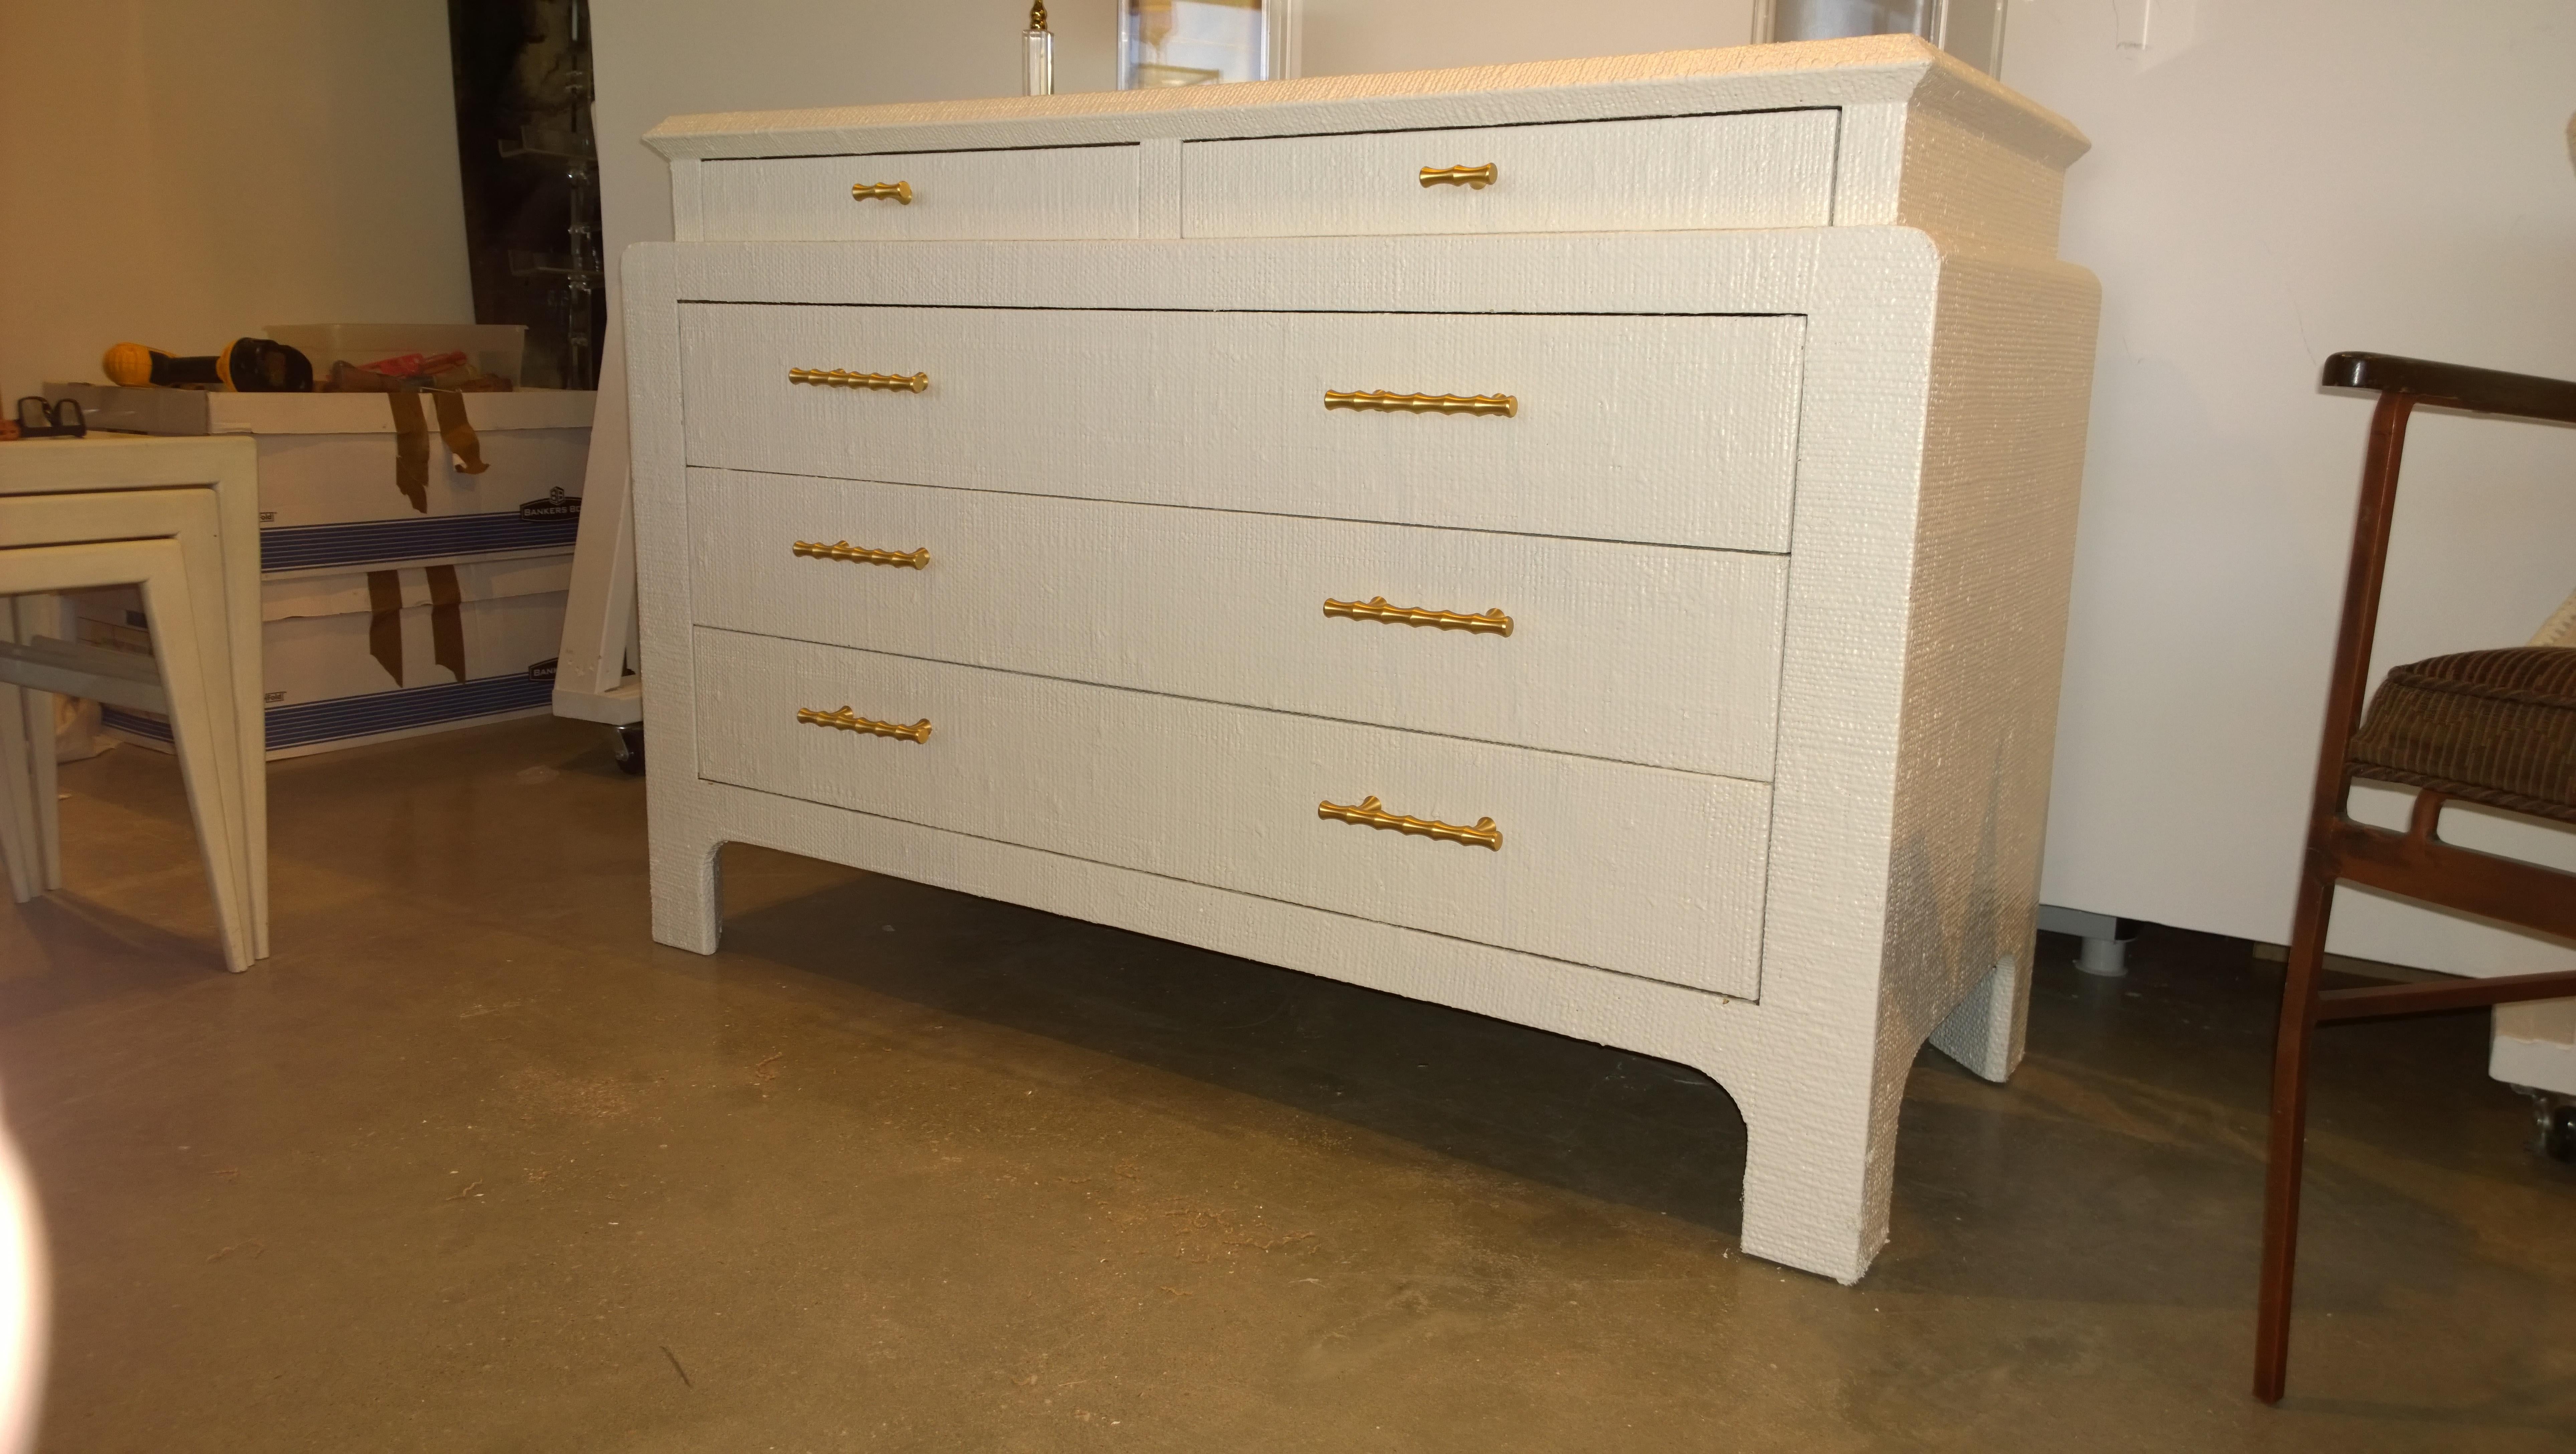 Offered is a chinoiserie style Mid-Century Modern Harrison Van Horn newly lacquered in creamy white grasscloth dresser with new brass bamboo style hardware pulls. This piece is finished at the back and could float in any space. This elegant yet